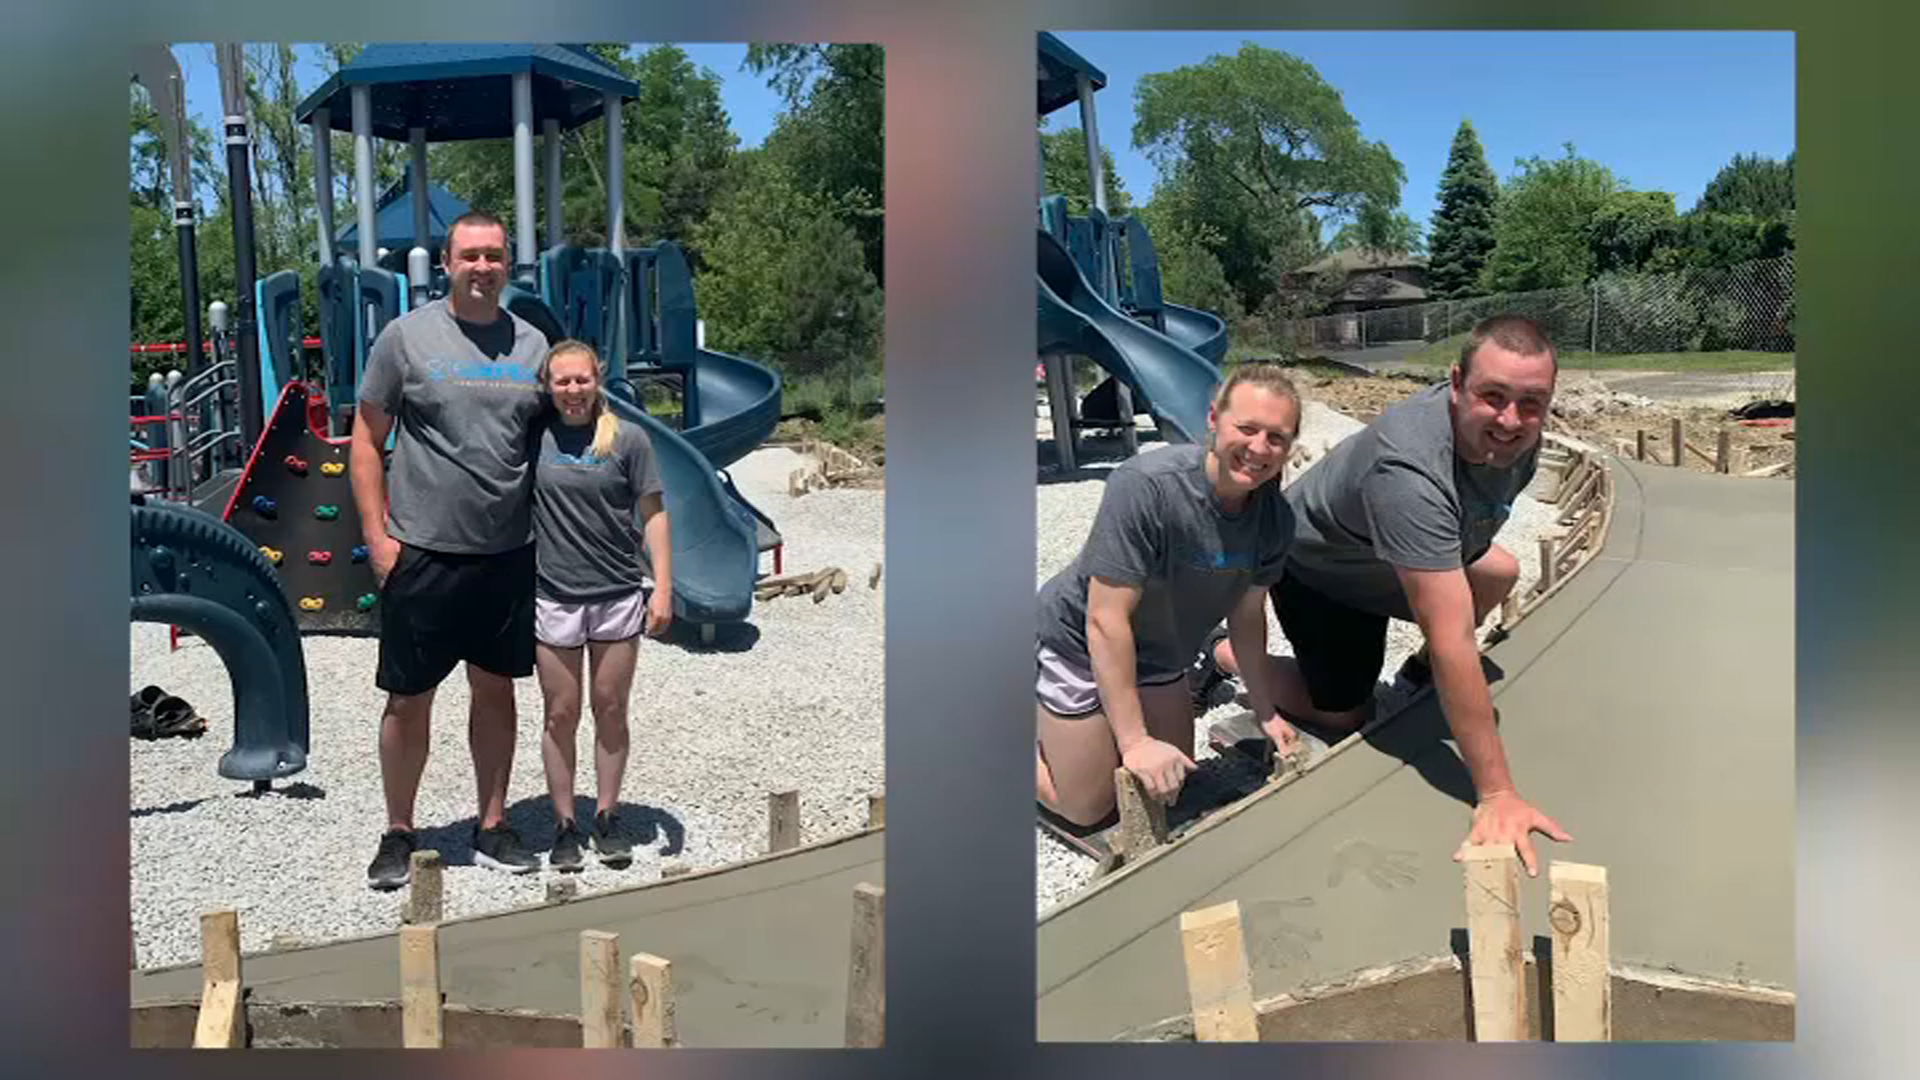 Kendall Coyne, Michael Schofield want kids to 'Dream Big' at Palos Heights  park – WGN-TV